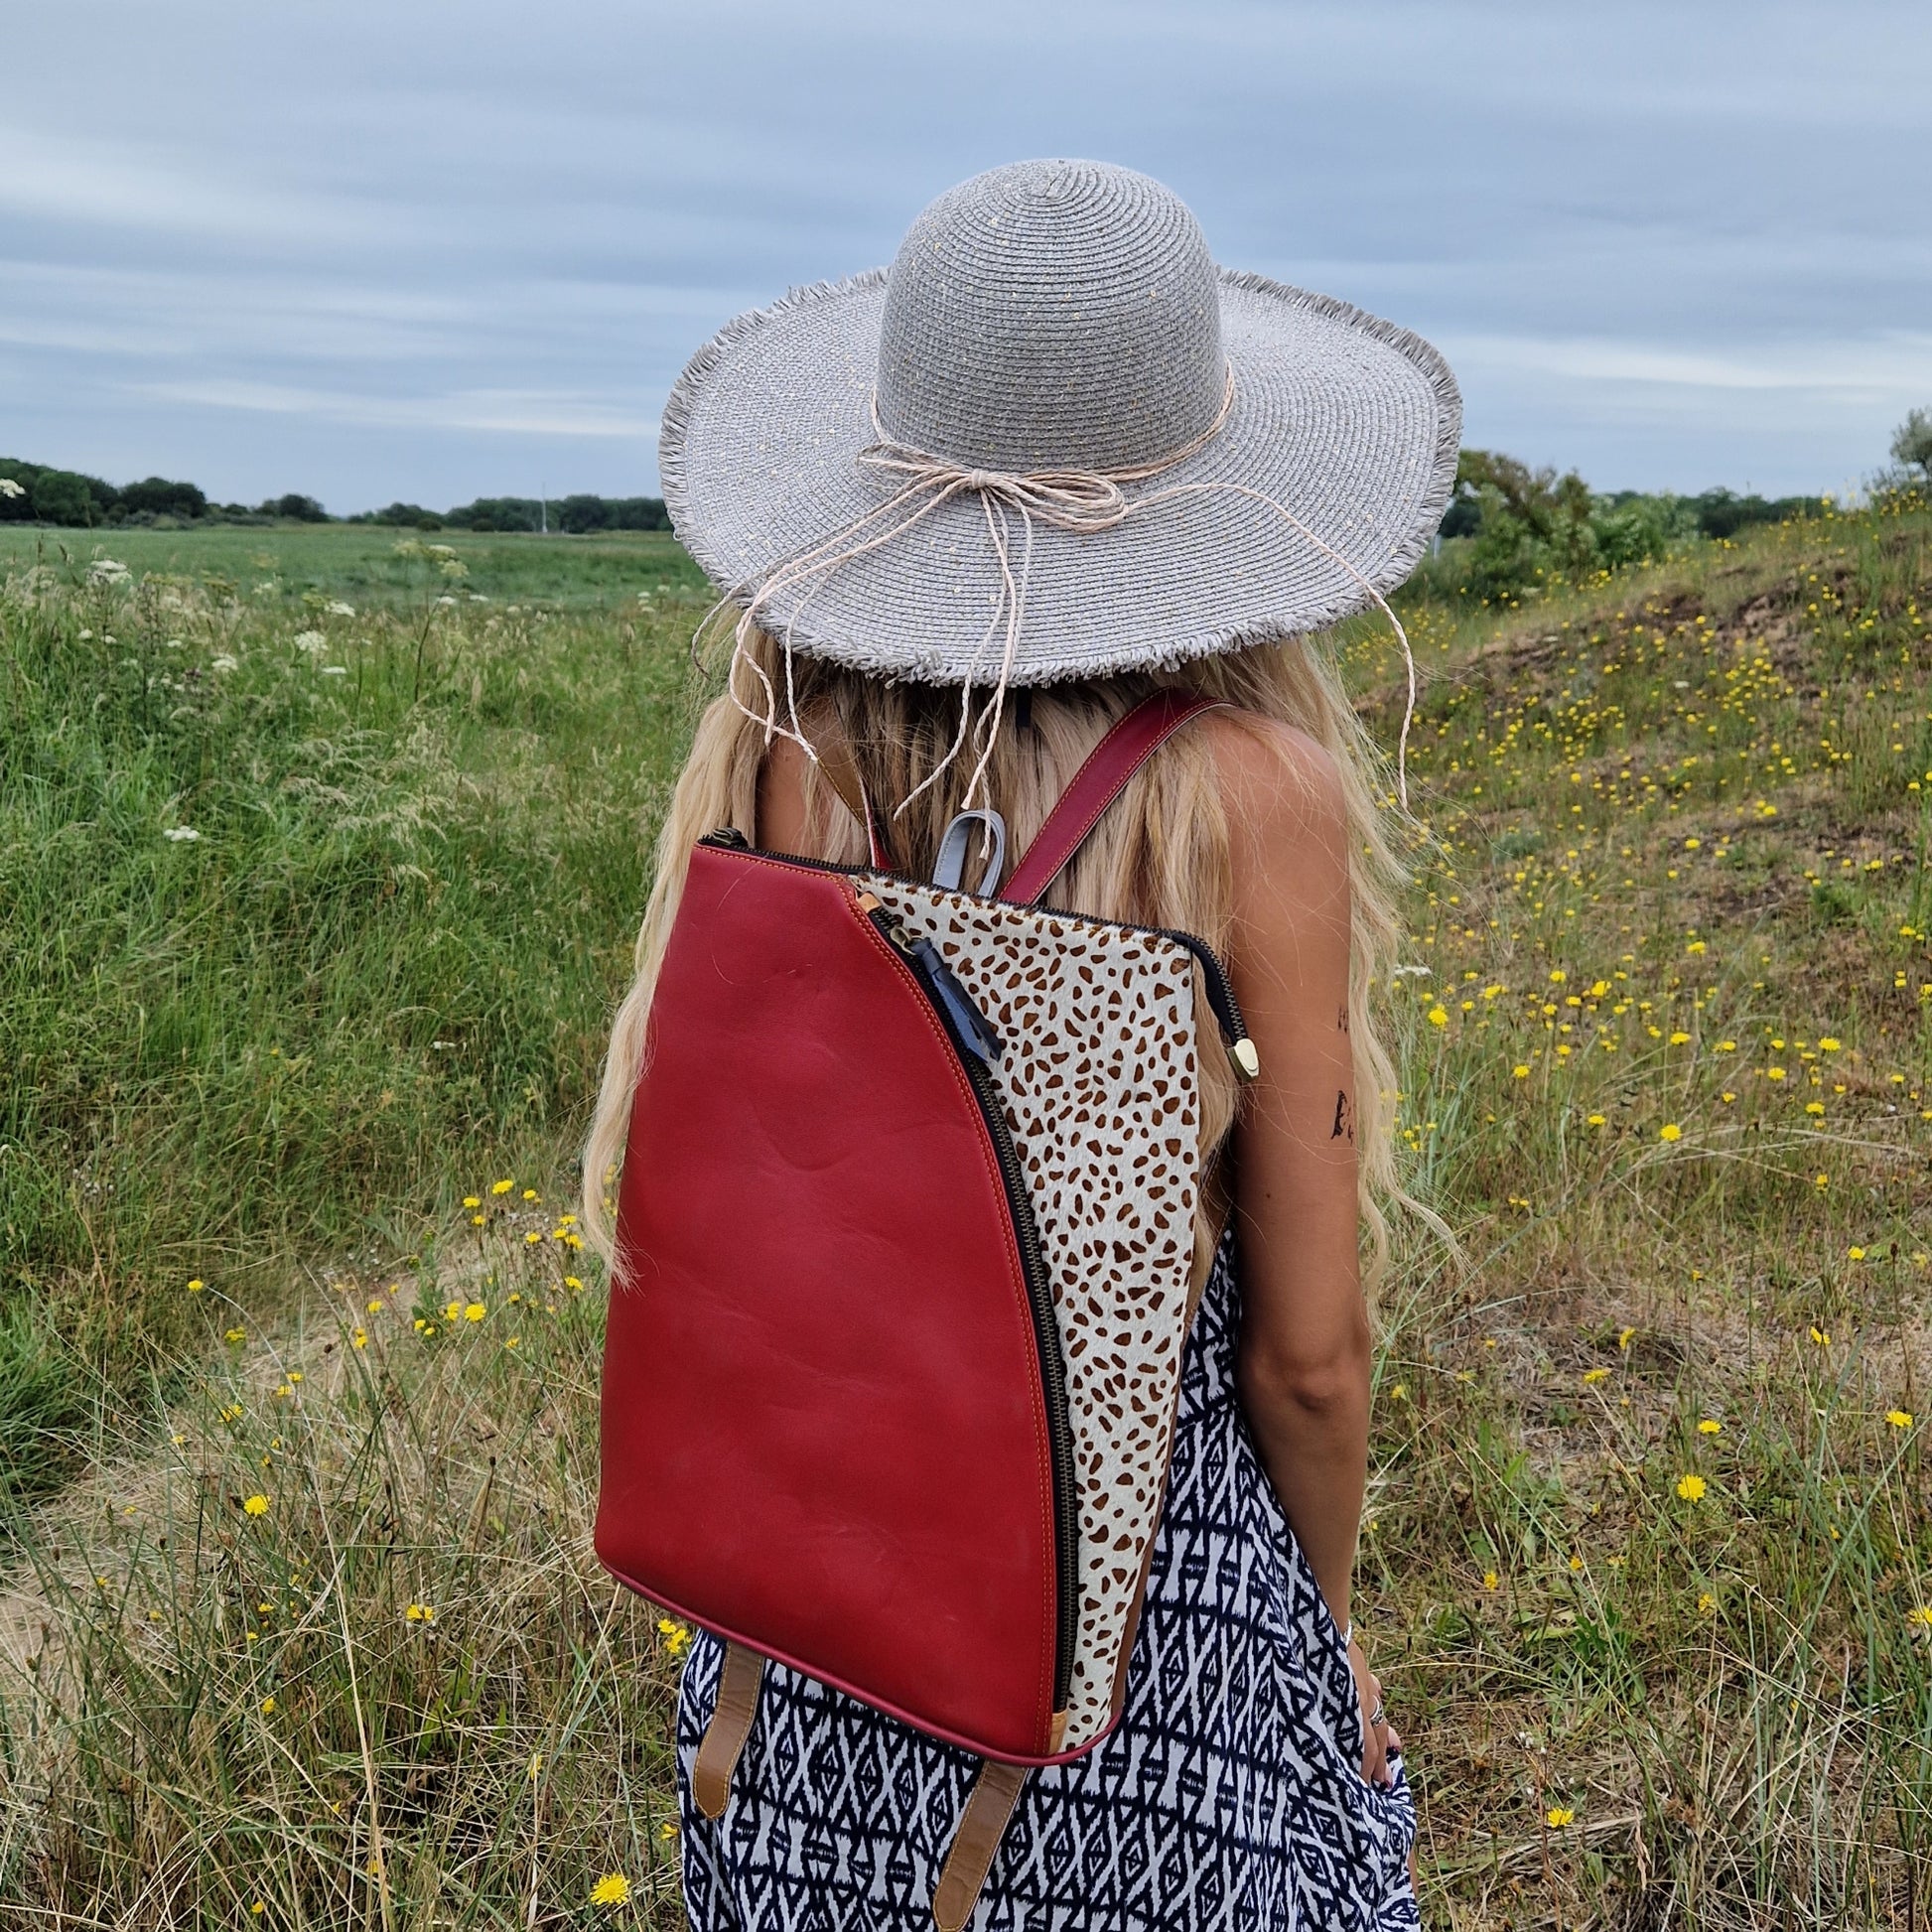 Girl wearing Red leather backback with white cow hide panel decorated in brown spots.